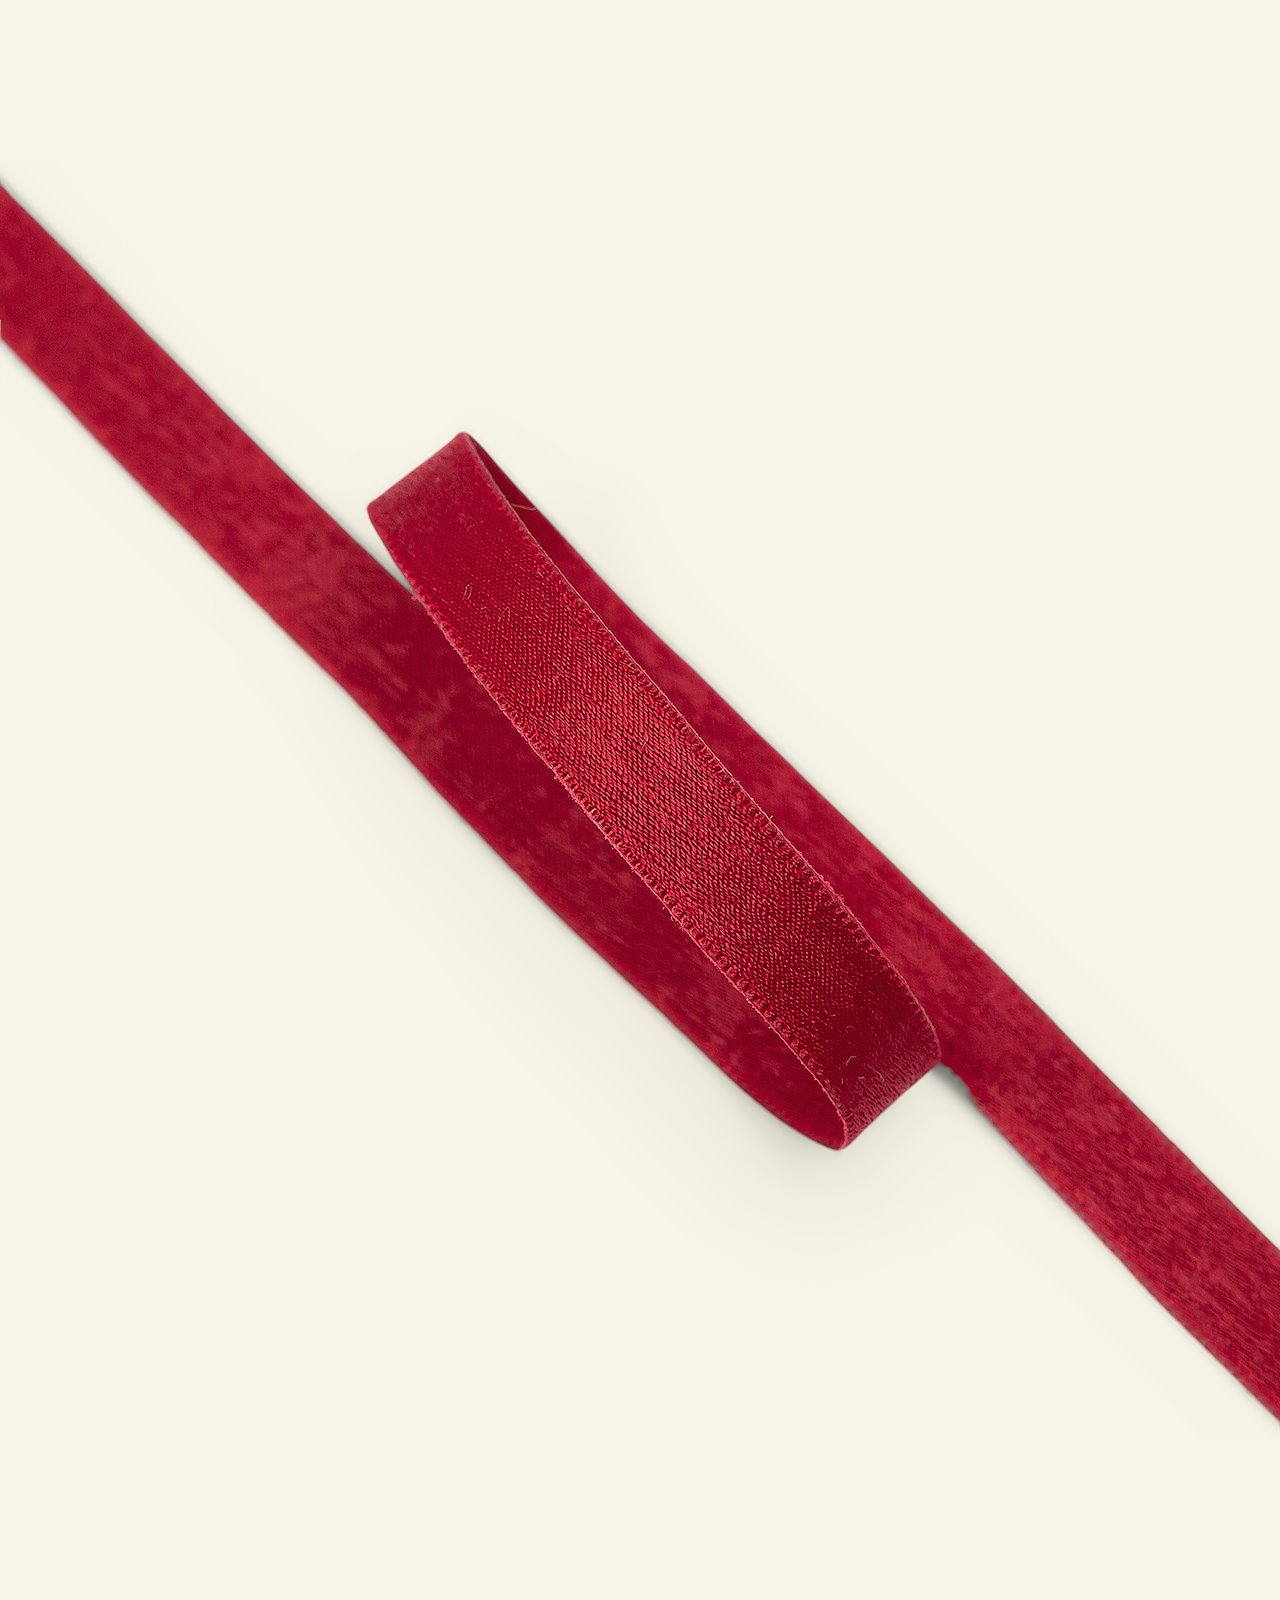 Satin ribbon 10mm red 3m 22230_pack